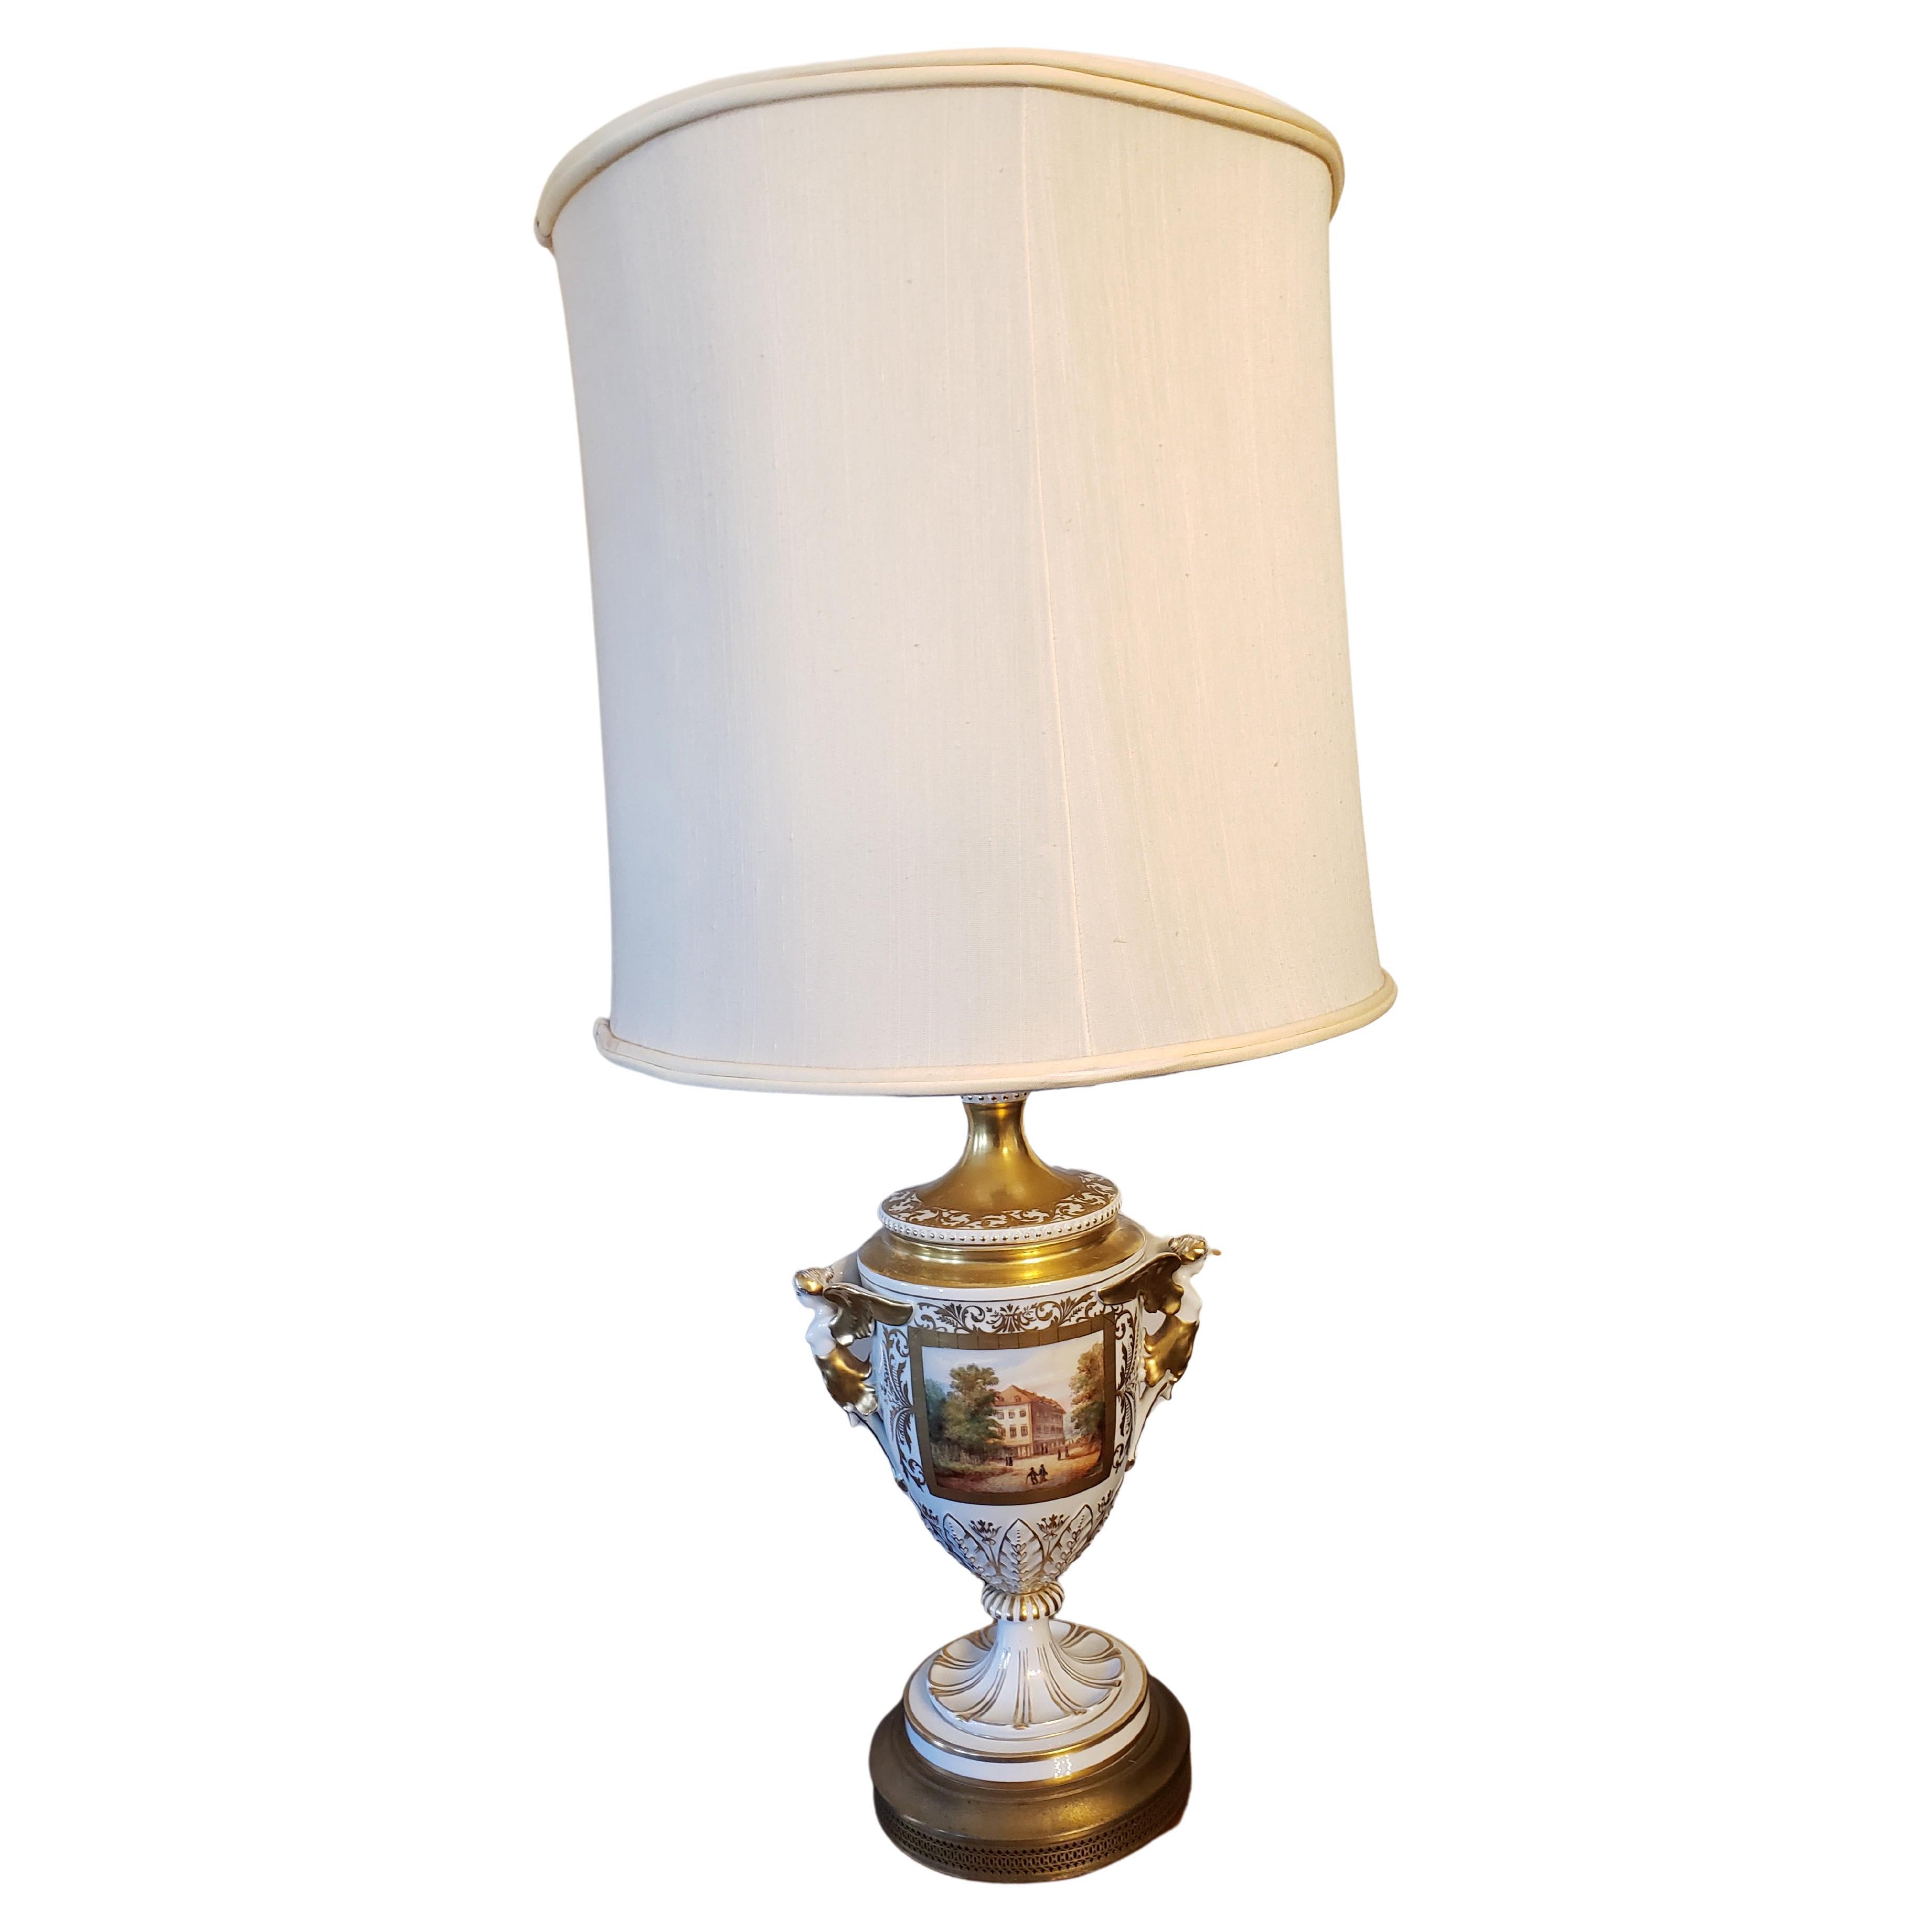 Antique English Porcelain Hand Painted 24K Gold Plated Trophy Lamp, Circa 1920s For Sale